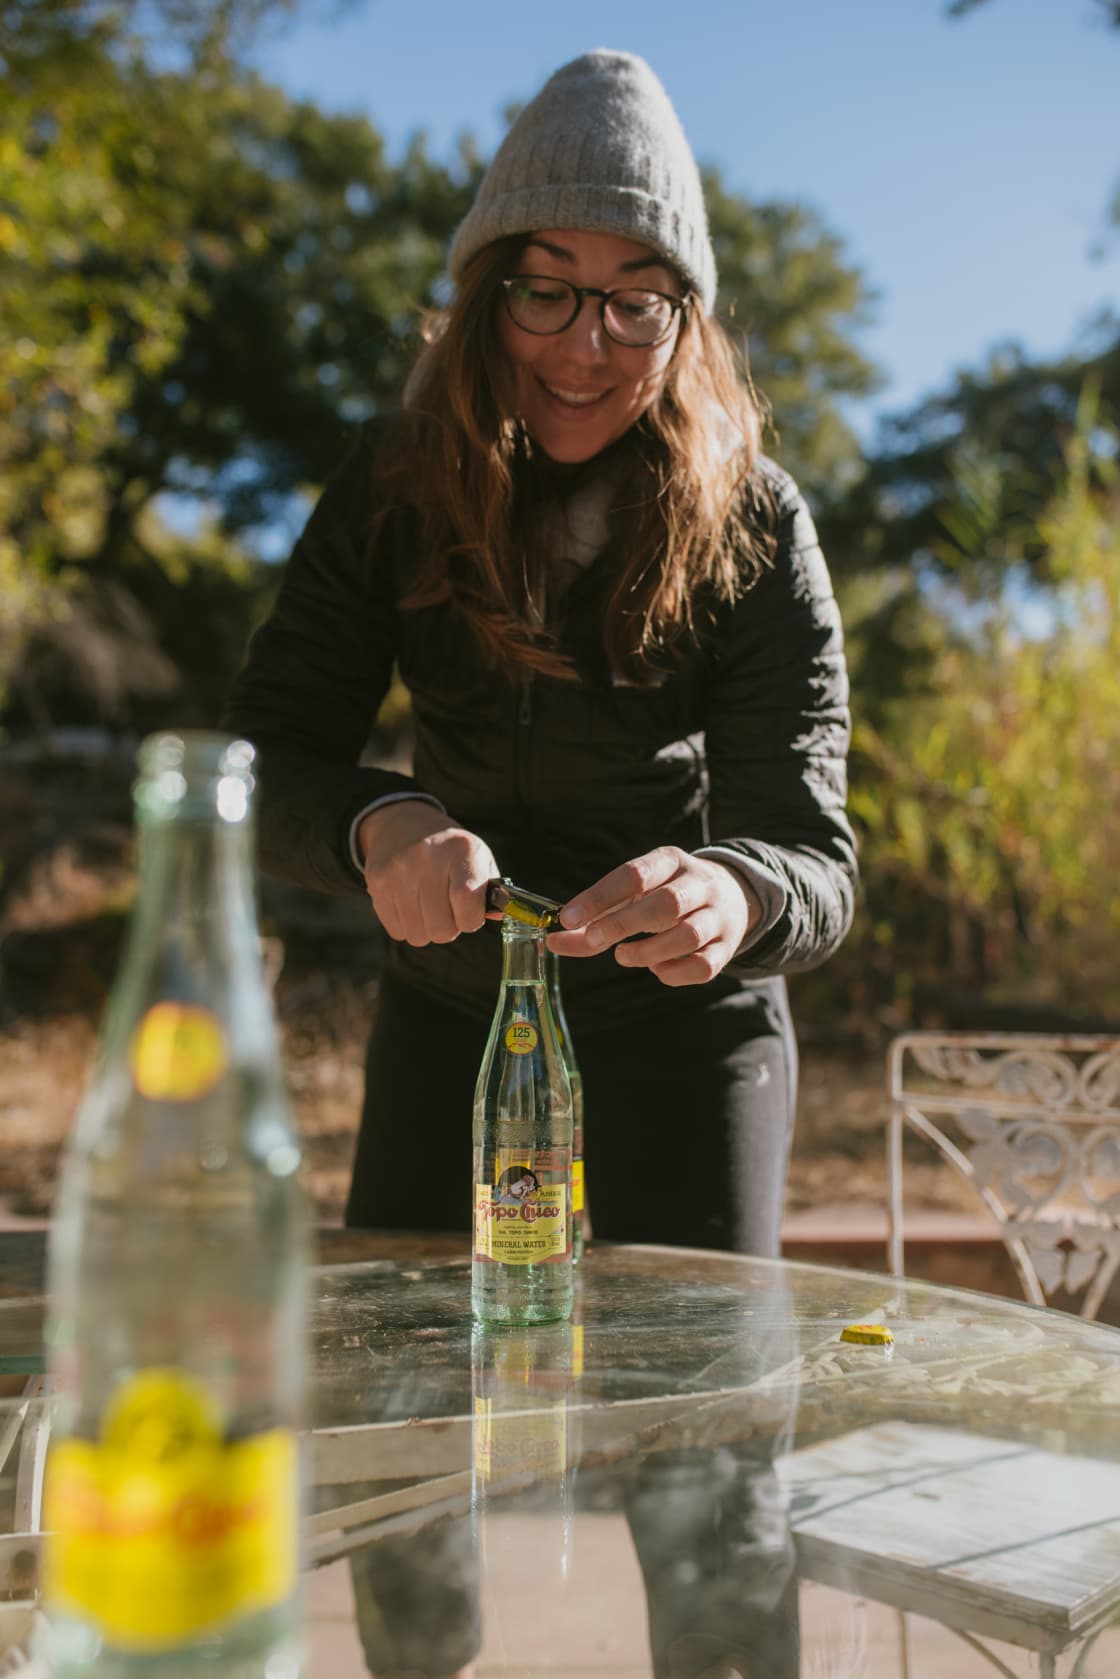 Started out our morning with some Topo Chico.